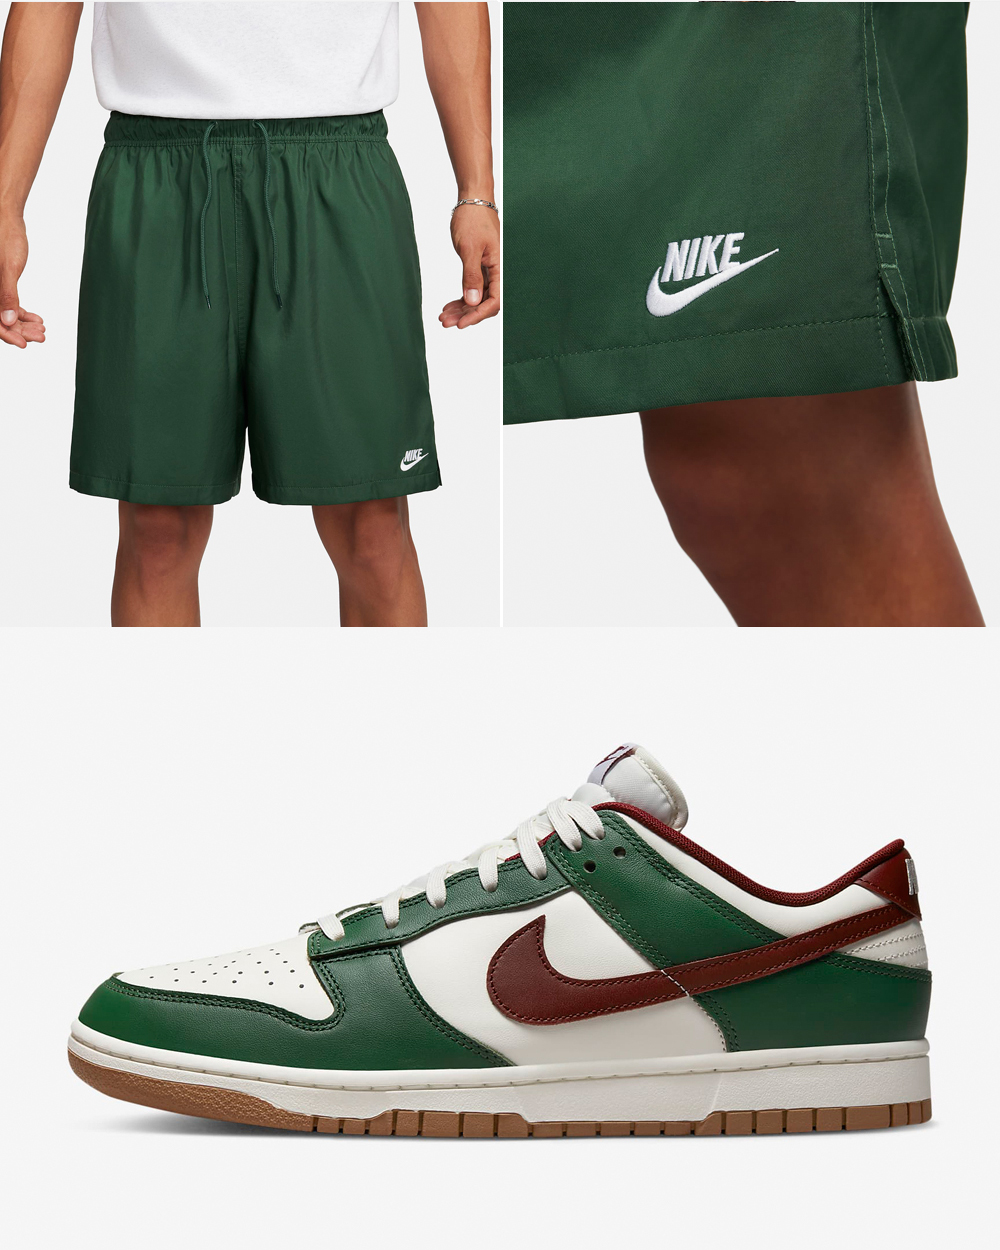 Nike-Dunk-Low-Gorge-Green-Shorts-Outfit